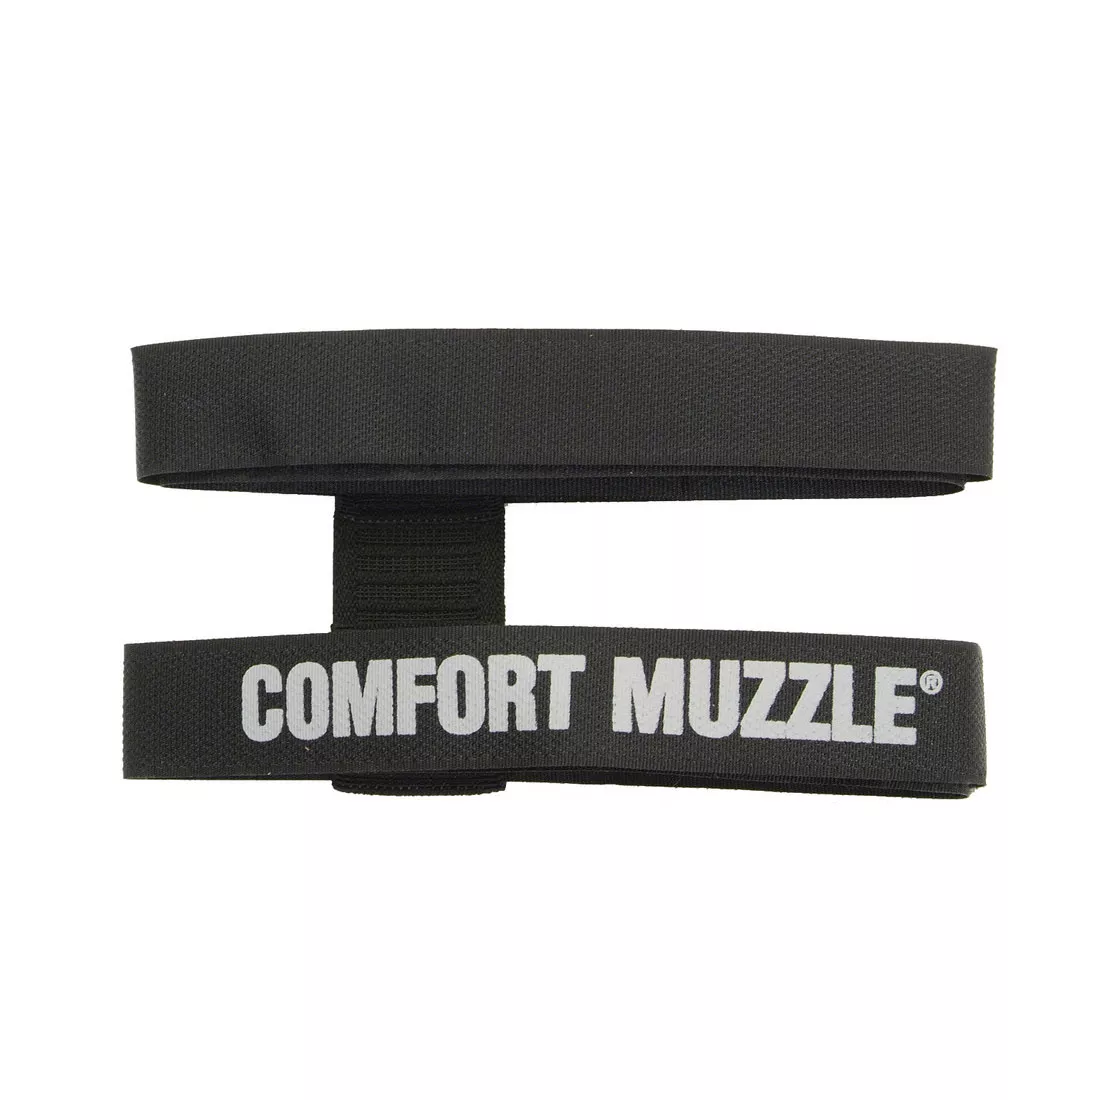 Adjustable Comfort Muzzle® for Dogs